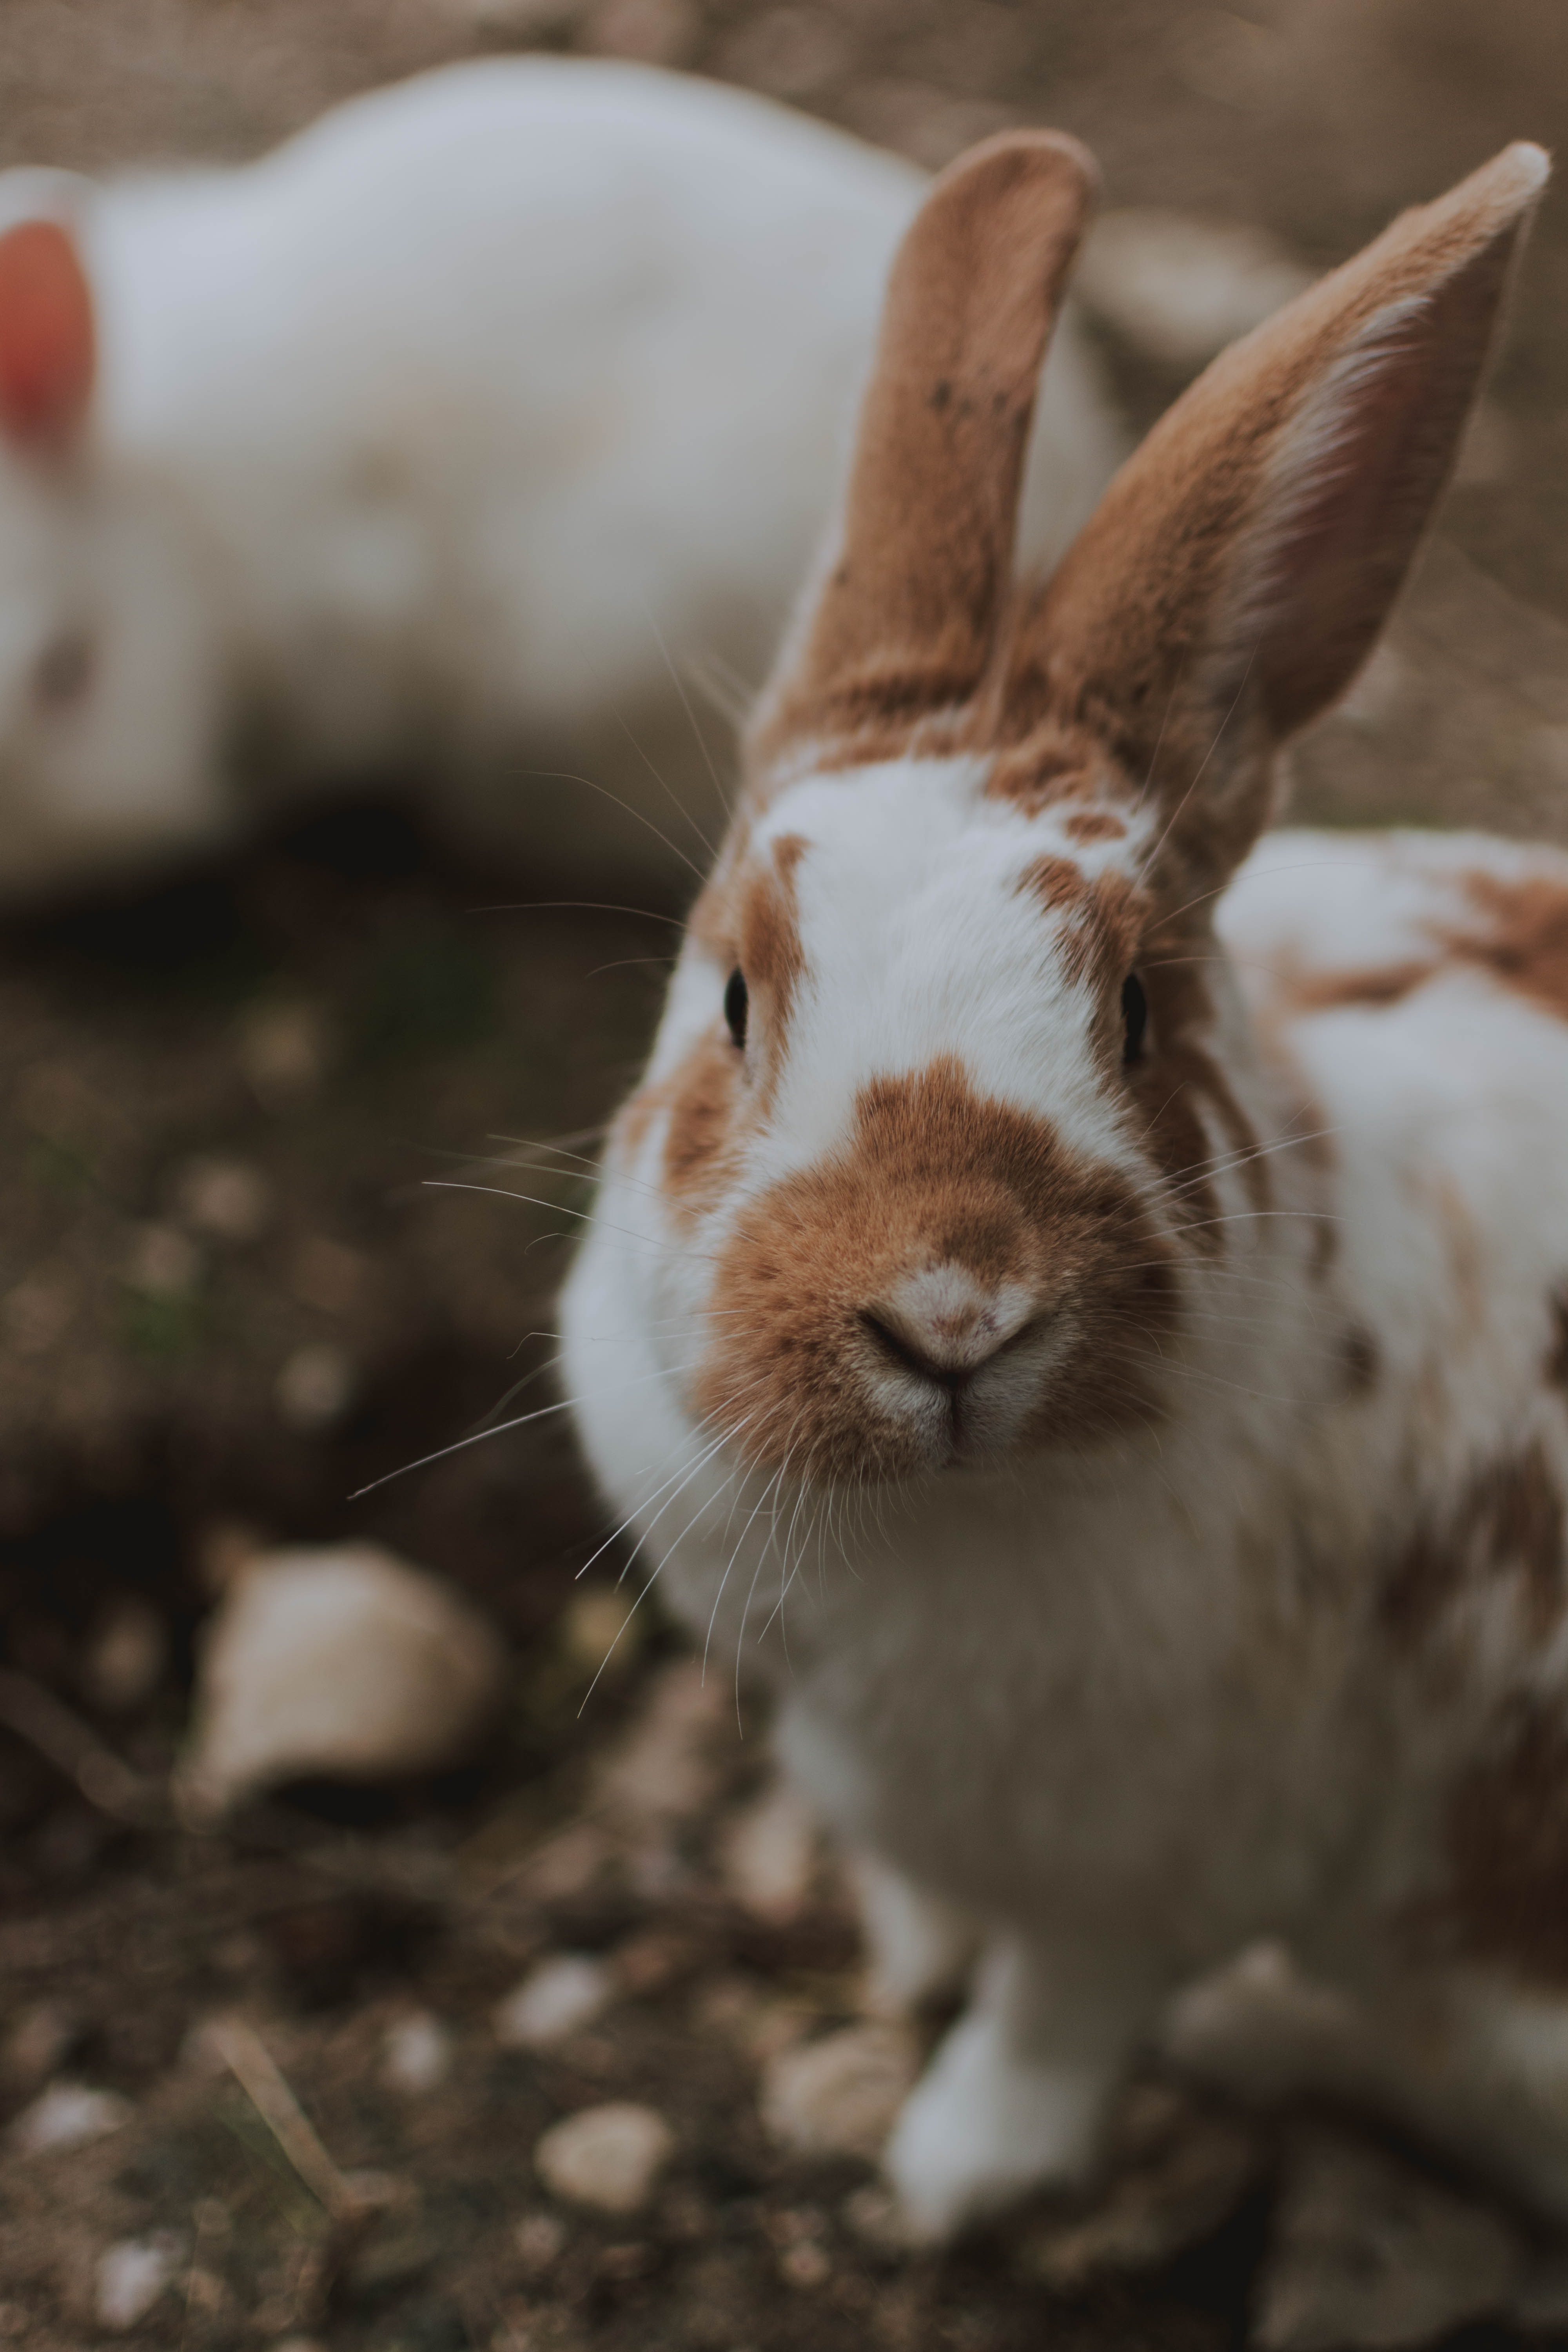 Rabbit poop can tell you a great deal about the health of a rabbit. That is why owners obsess over the size, quantity and quality of their rabbit's poop.